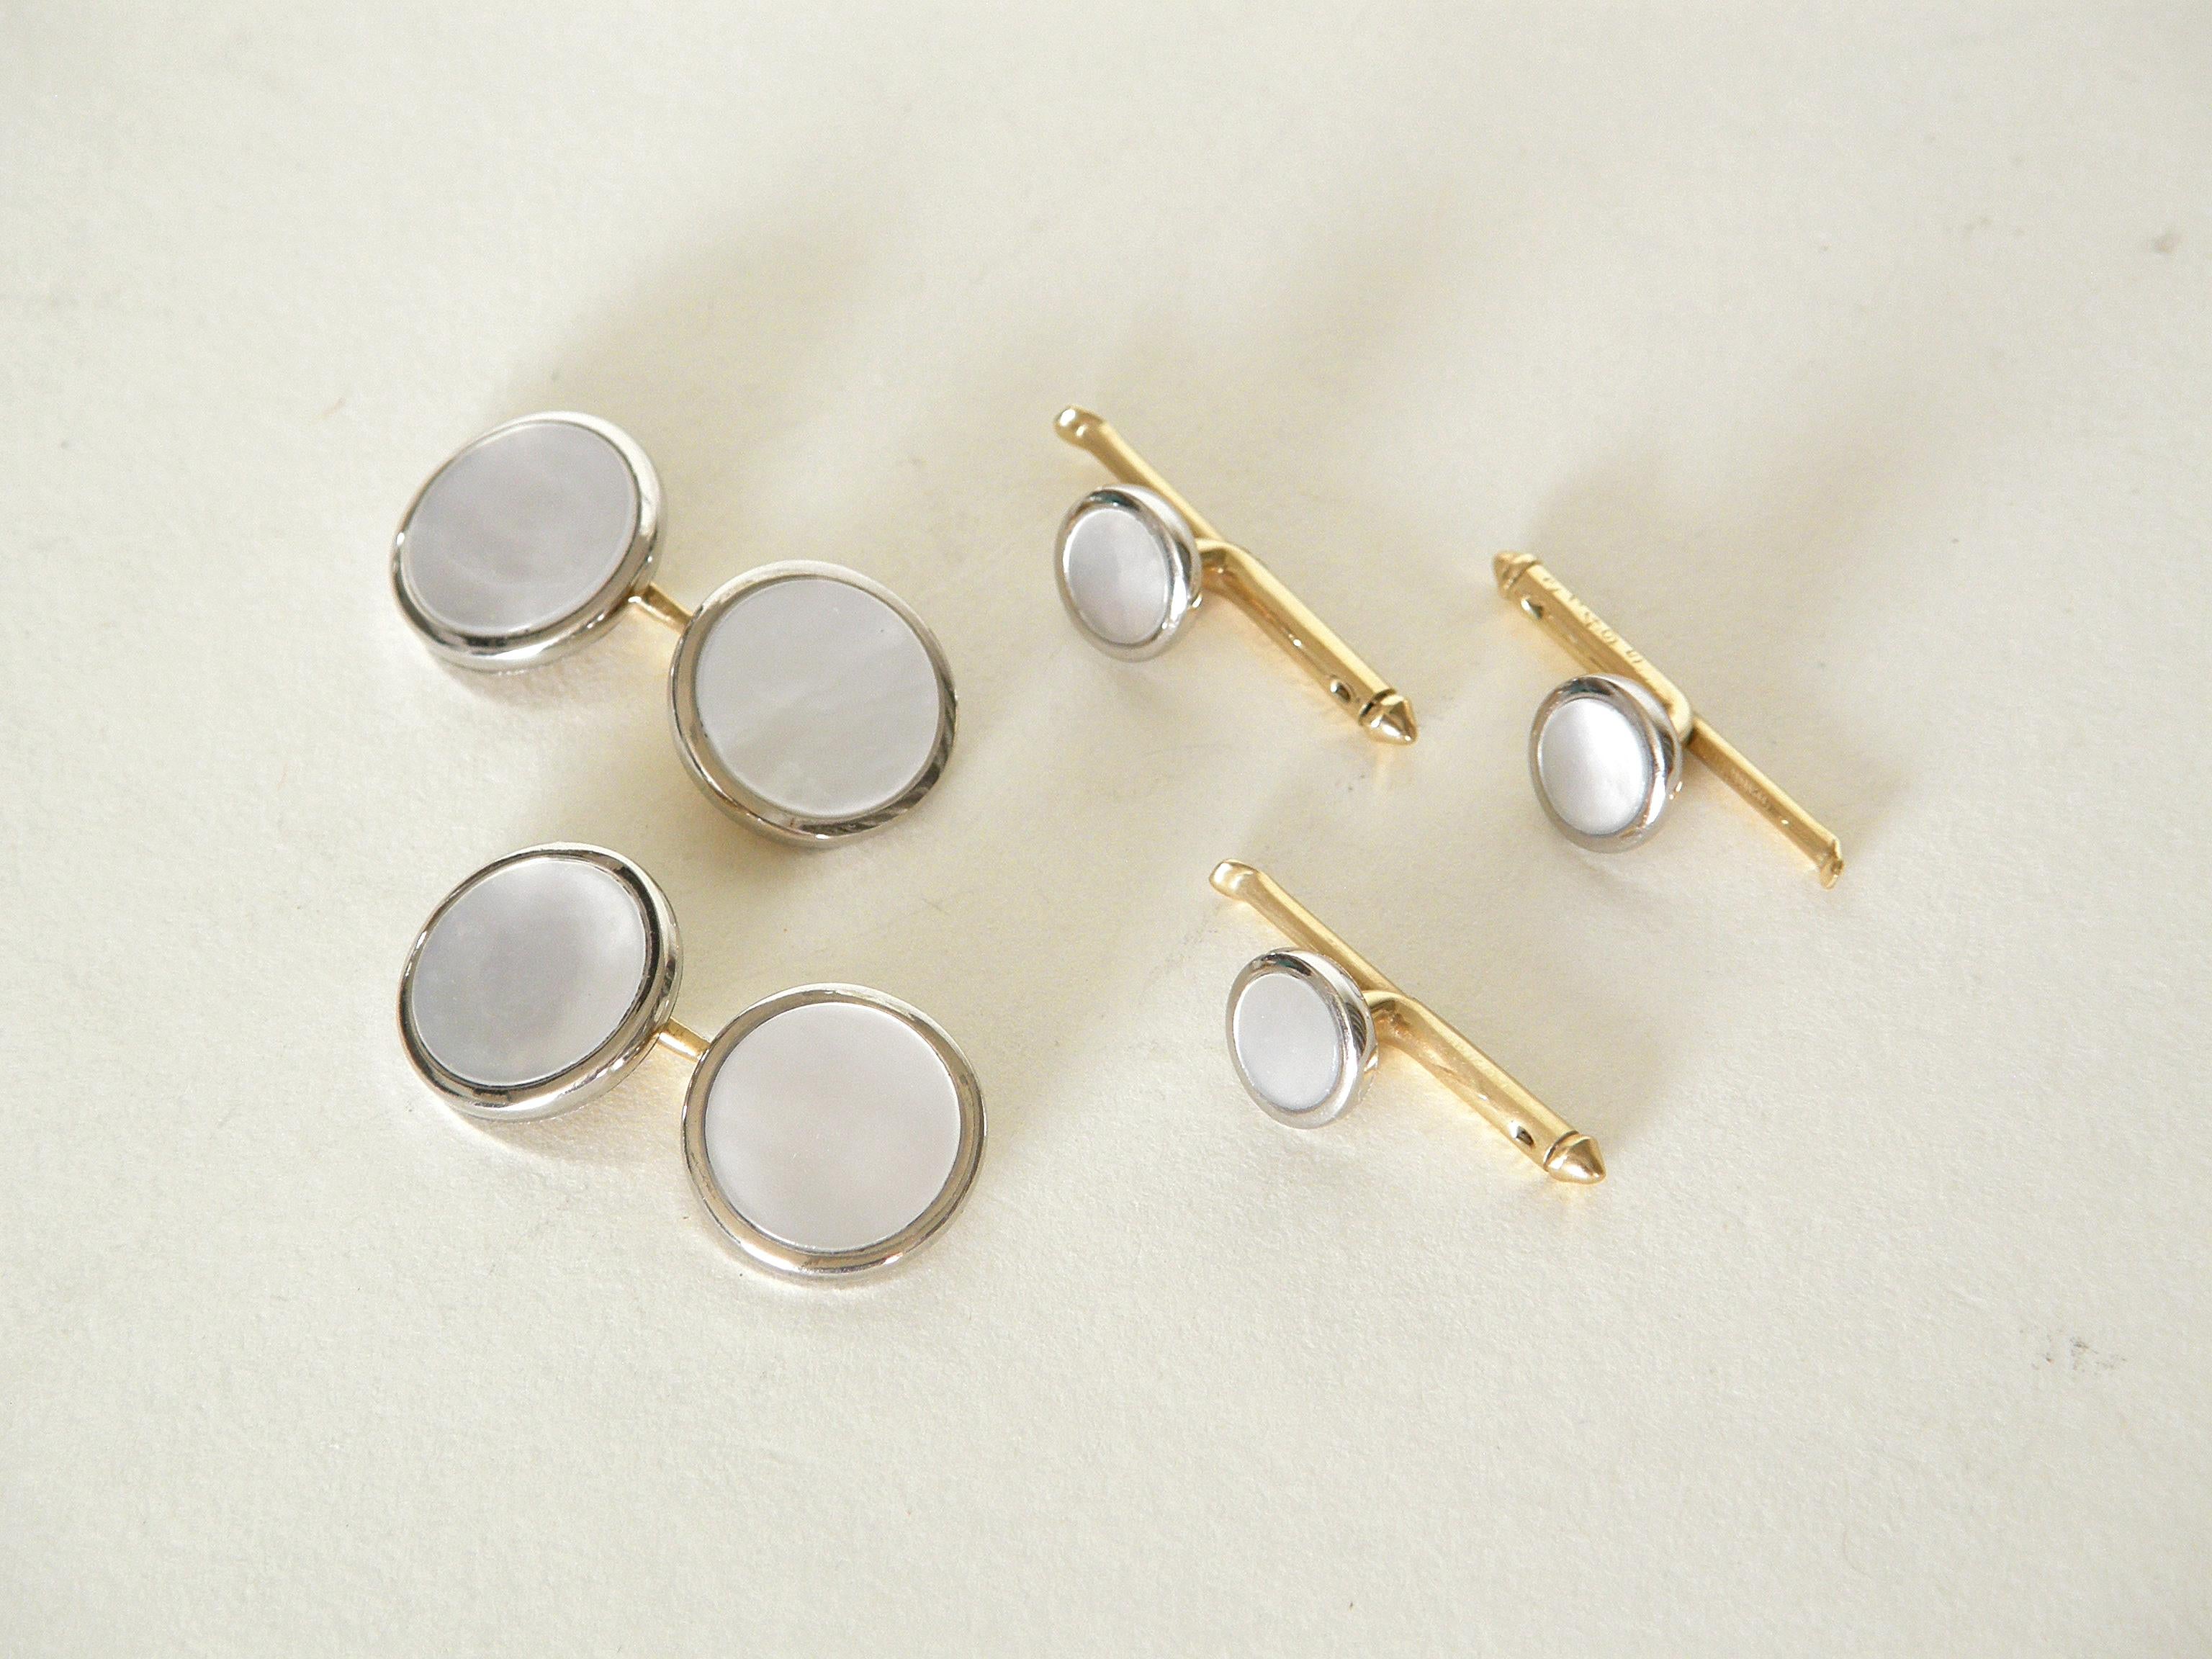 This handsome 14K gold and mother of pearl cufflinks and studs set come in their original Cartier display box. They were made for Cartier by Larter & Sons of Newark, New Jersey. Their style is one of classic, timeless elegance. They're marked 14K